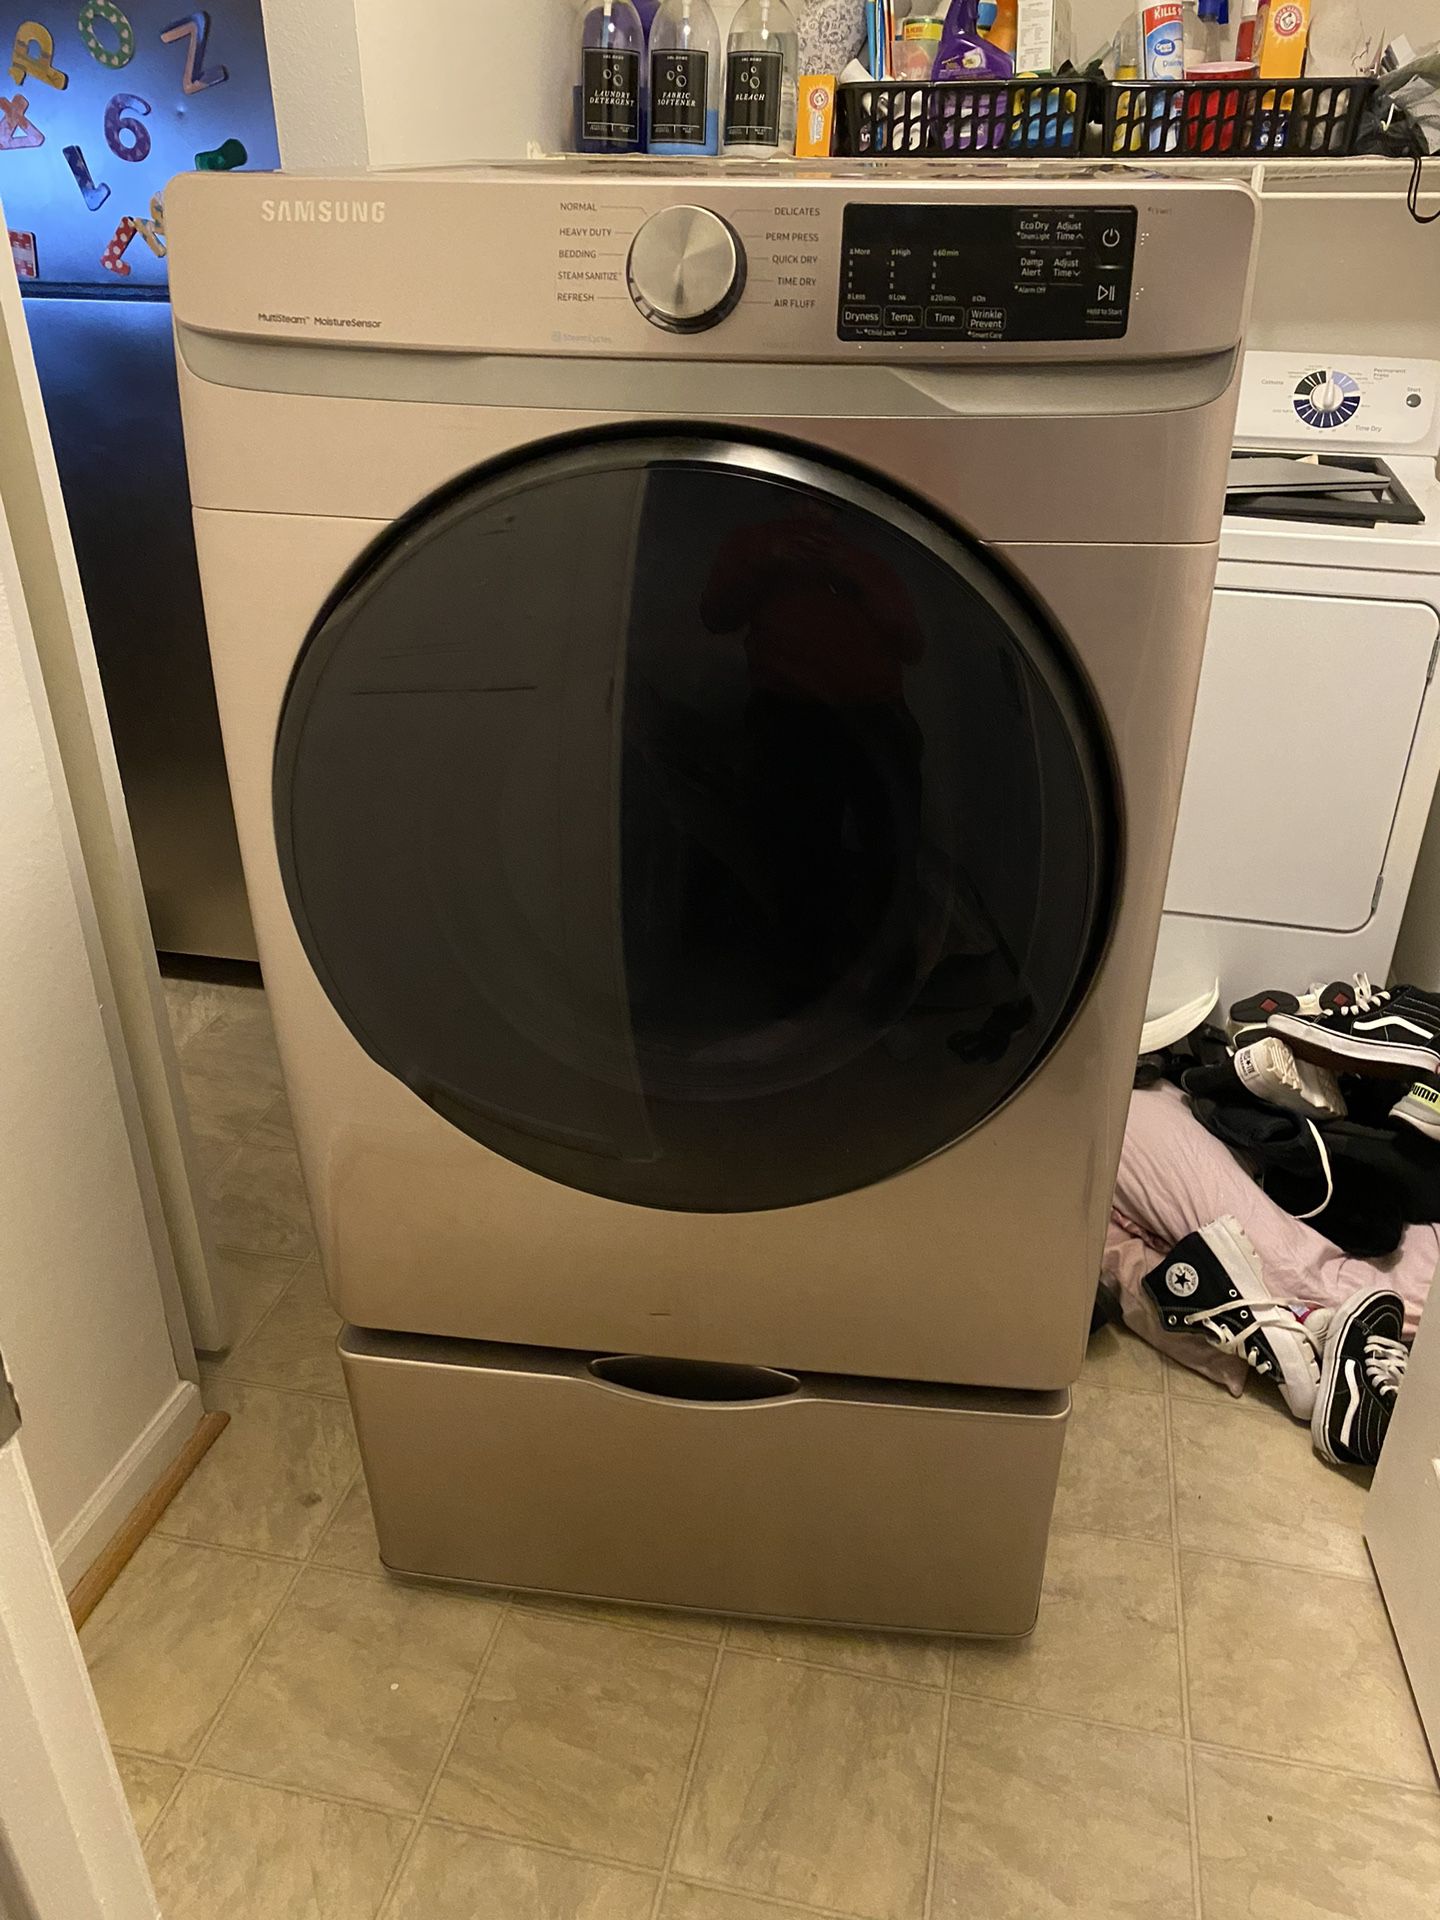 SAMSUNG WASHER AND DRYER W/ PULLOUT STORAGE 7.5 CU FT